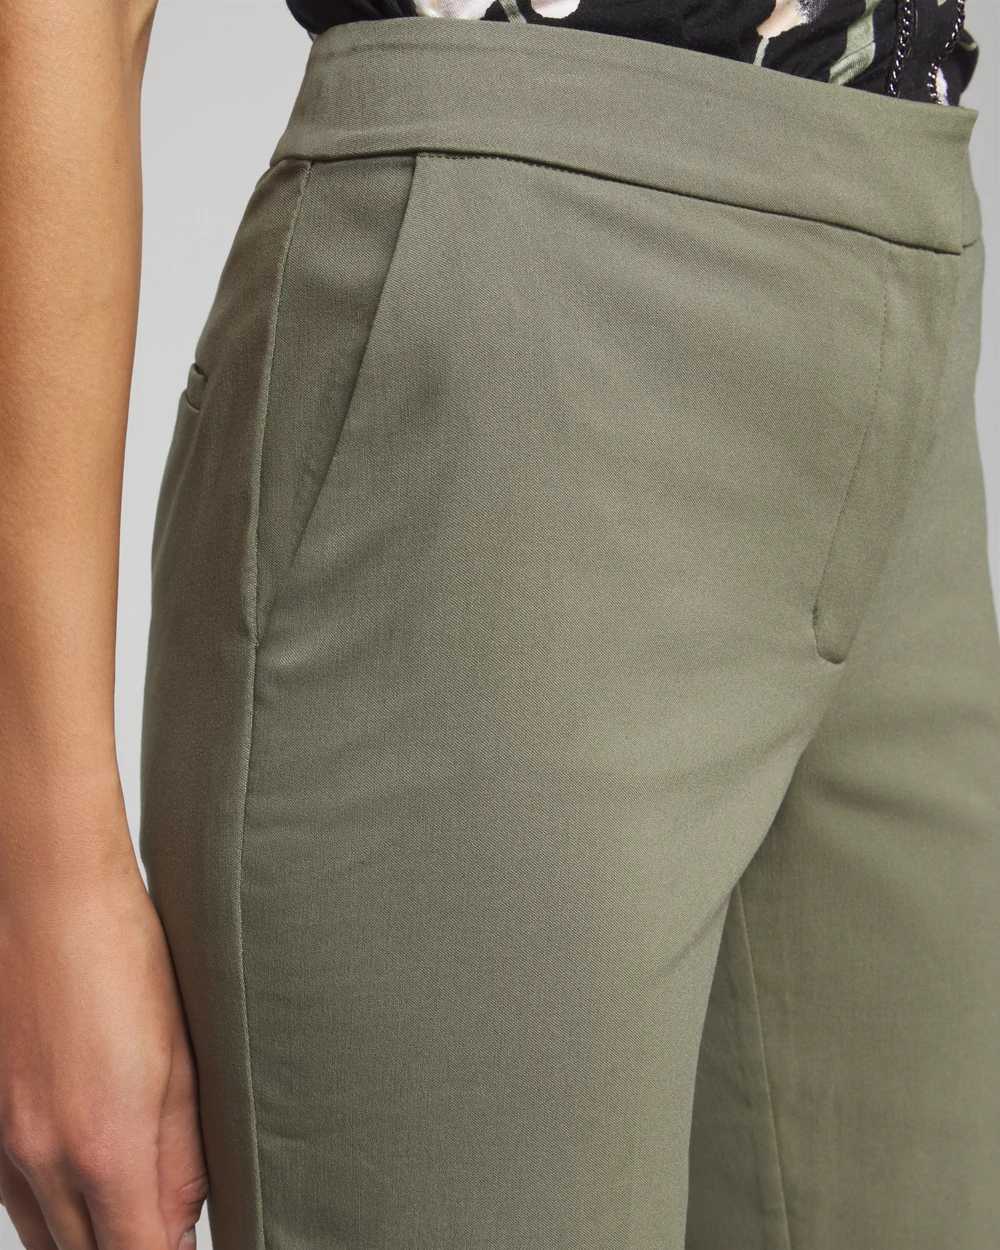 Outlet WHBM 10-Inch Bermuda Shorts click to view larger image.